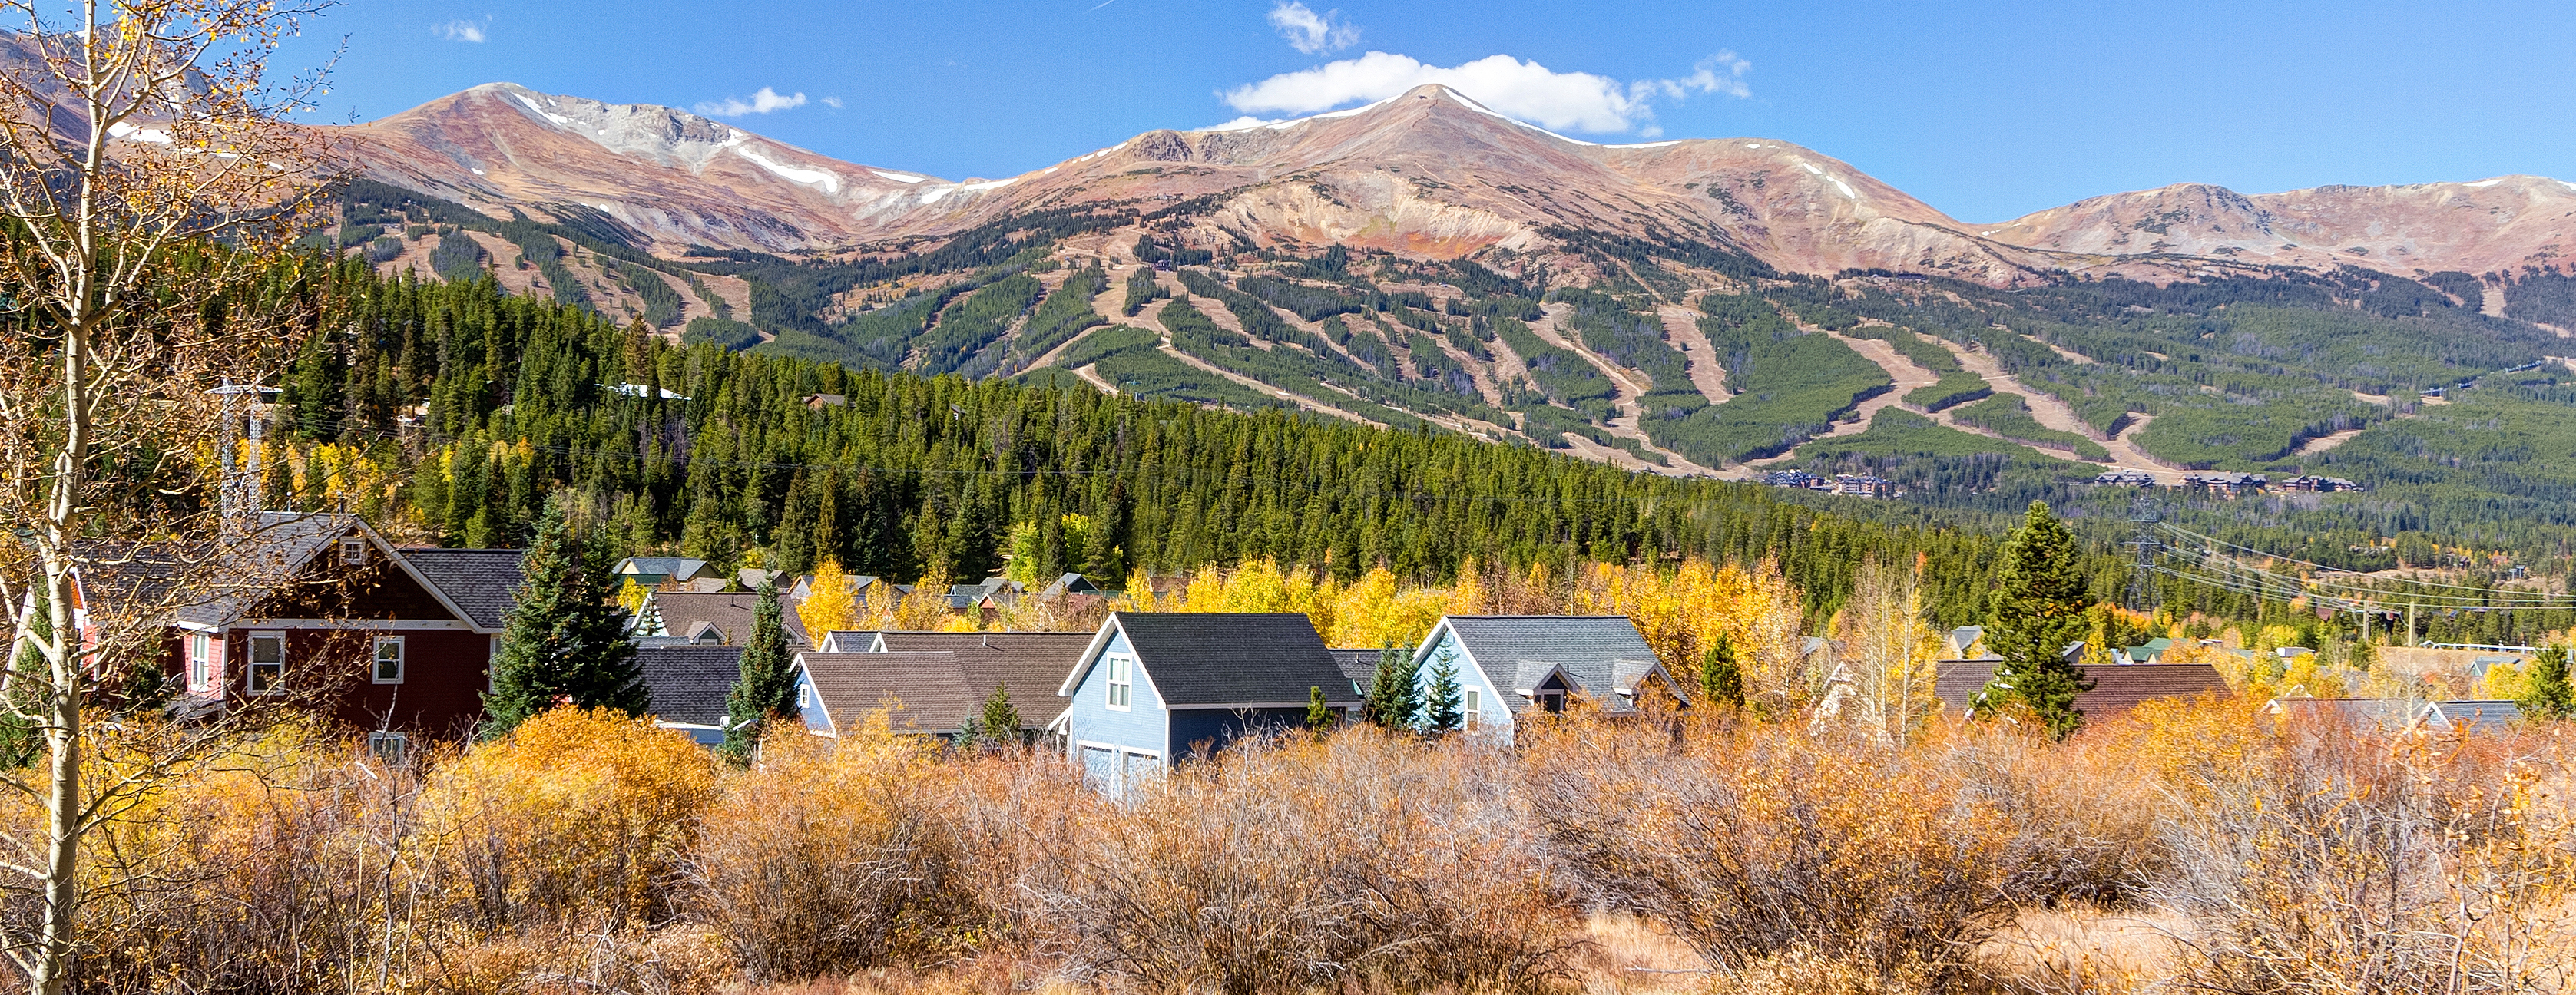 Affordable Housing Action Plan for the Town of Breckenridge